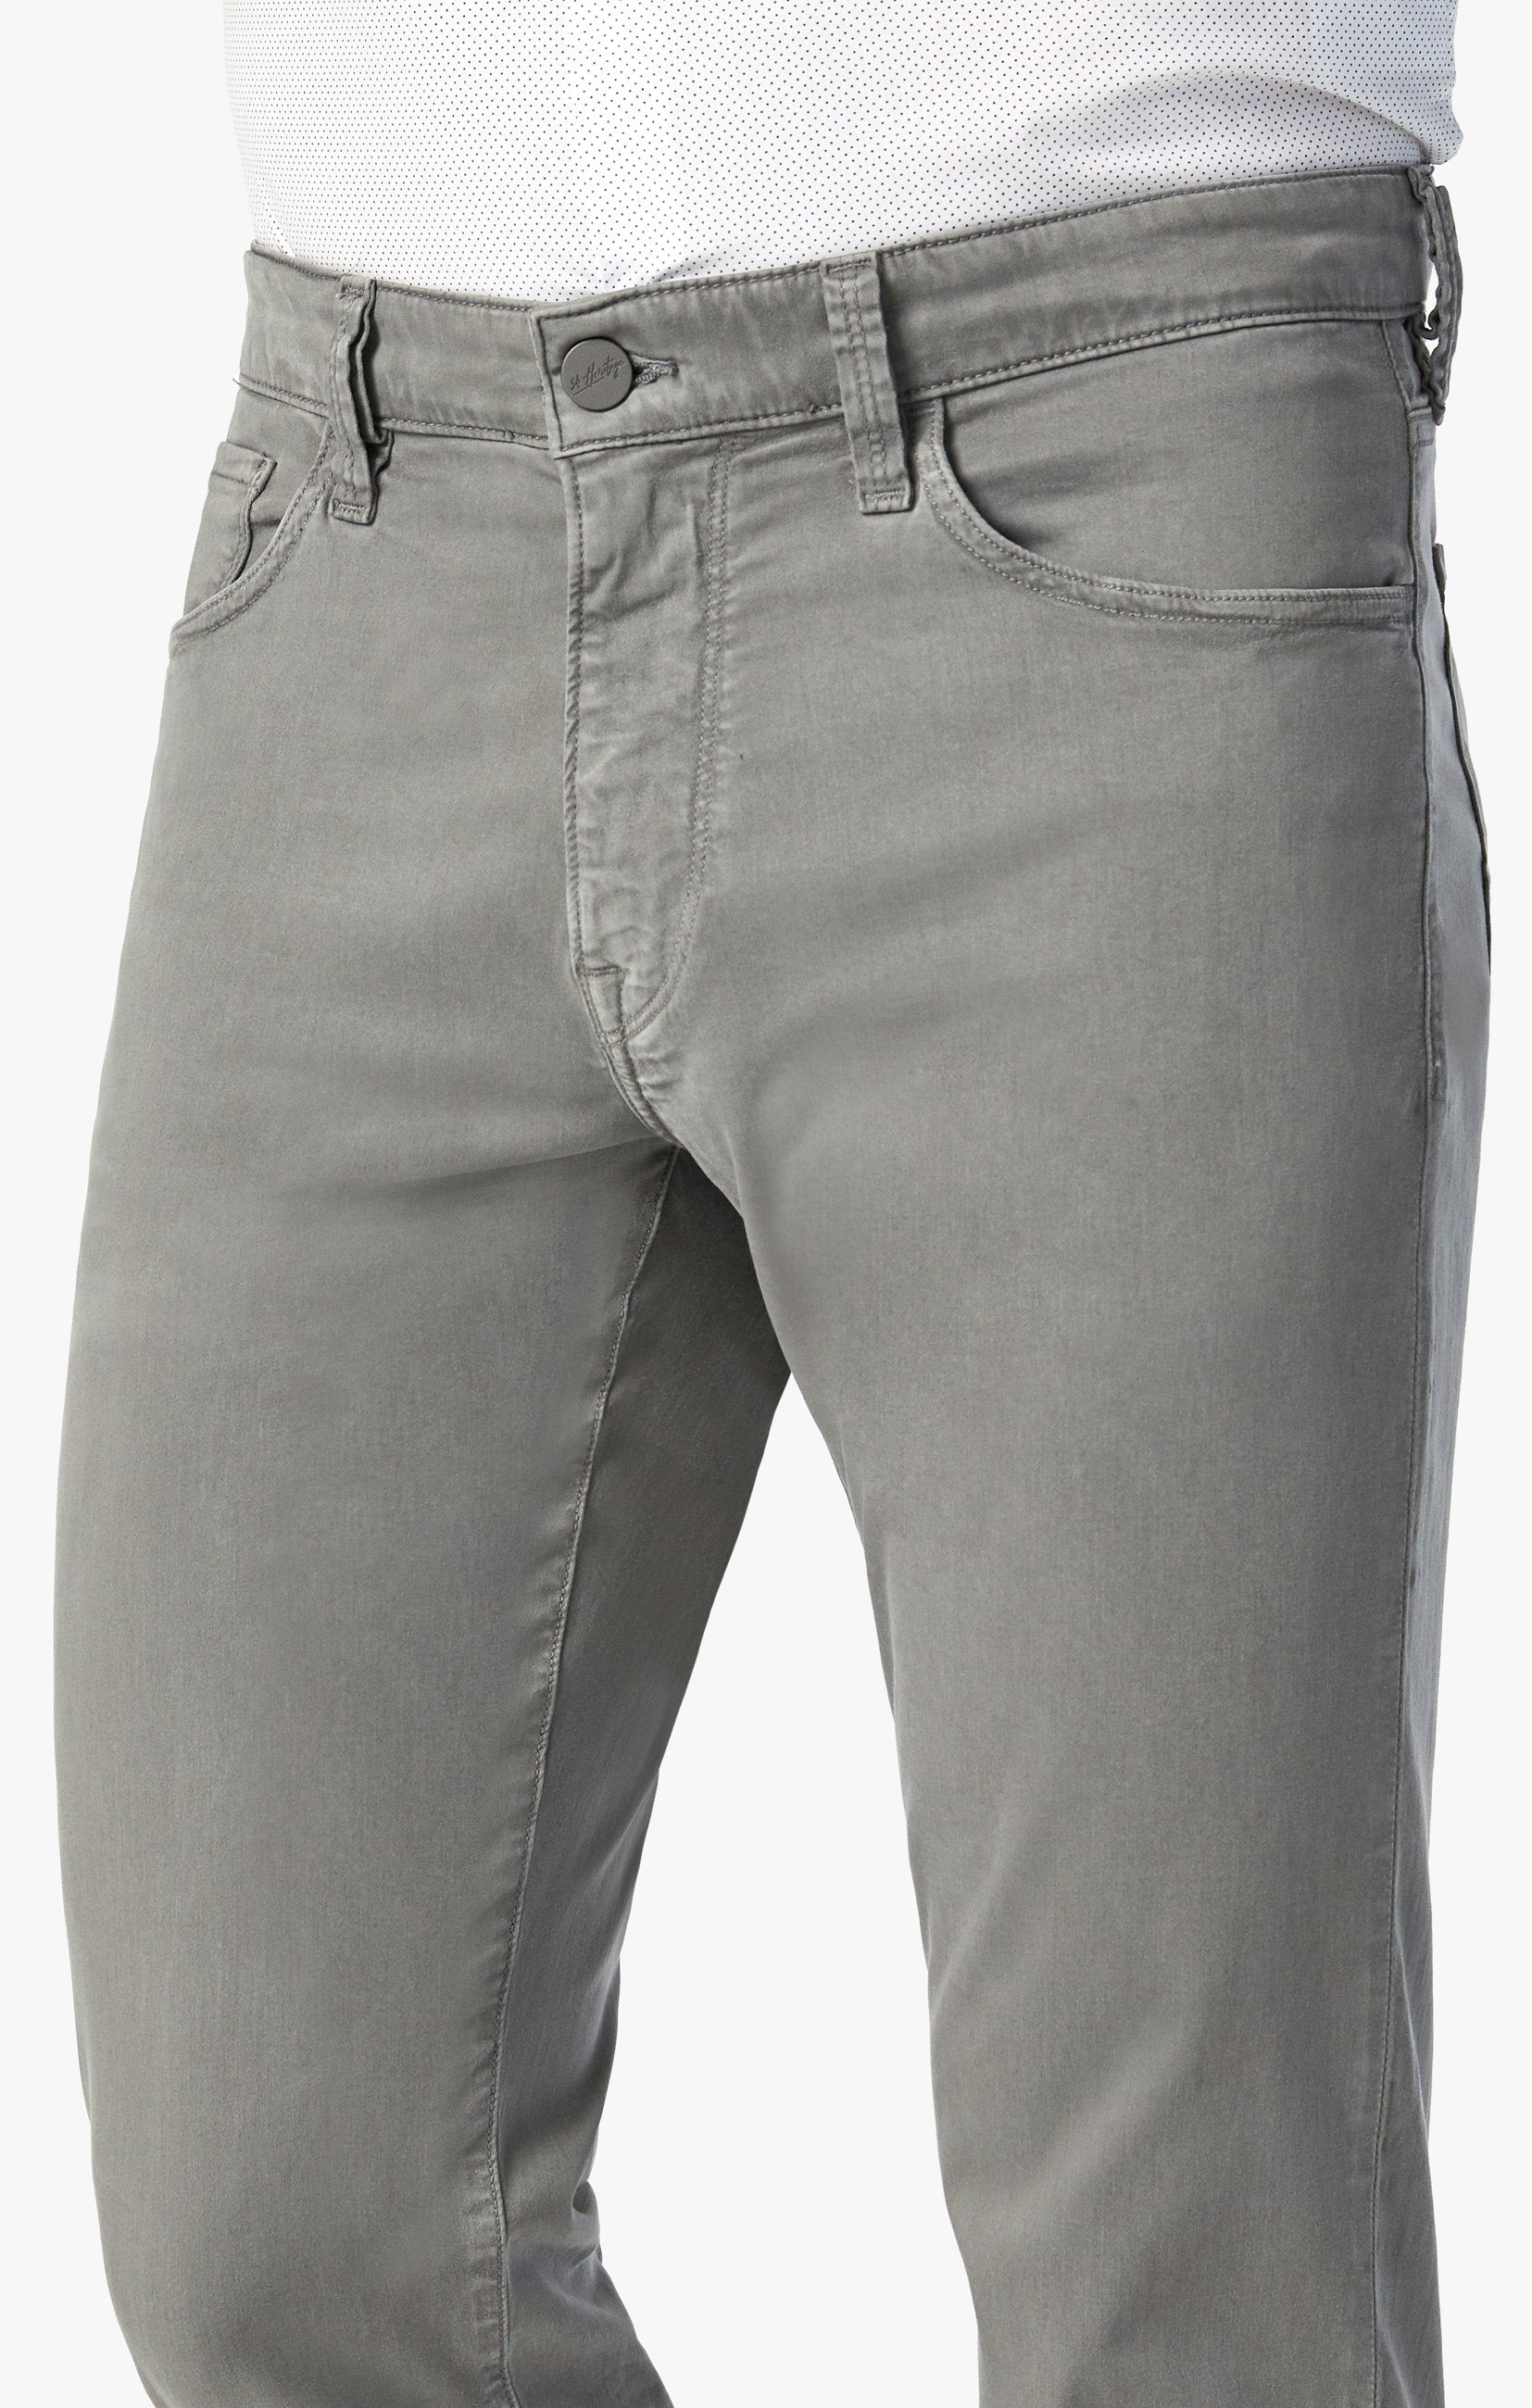 Charisma Relaxed Straight Pants In Pewter Twill Image 7